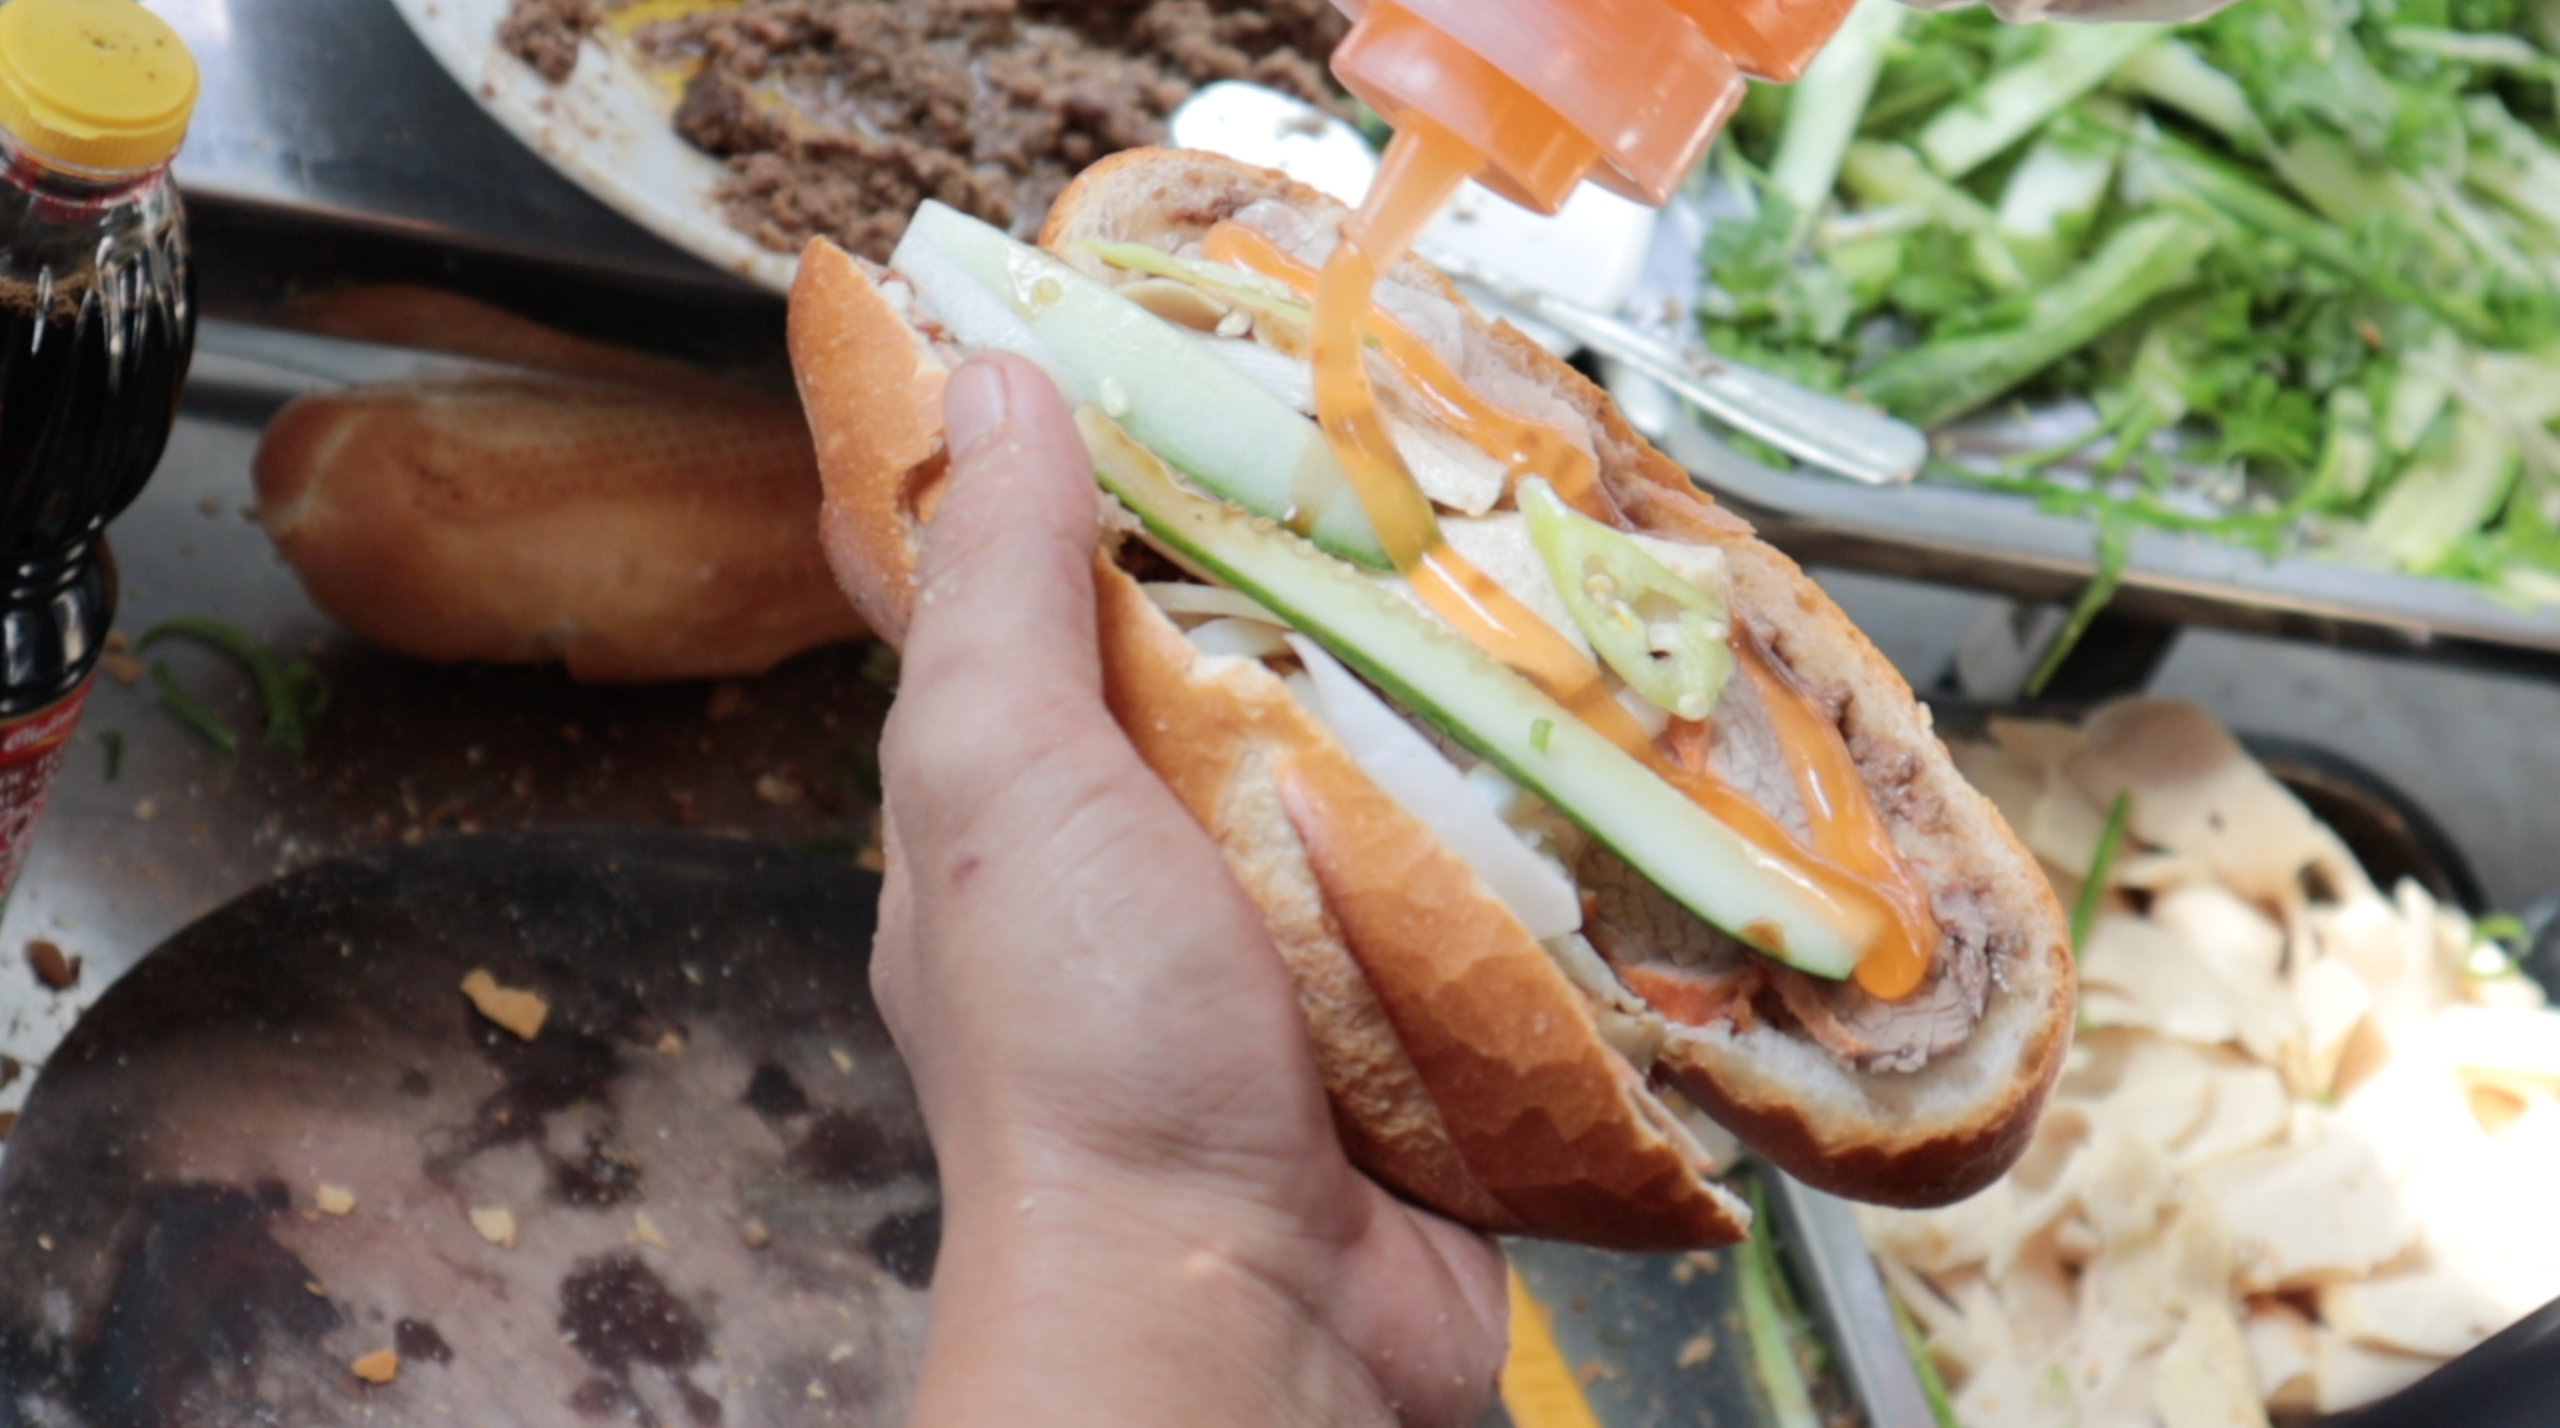 Check out this century-old 'banh mi' stand in downtown Saigon